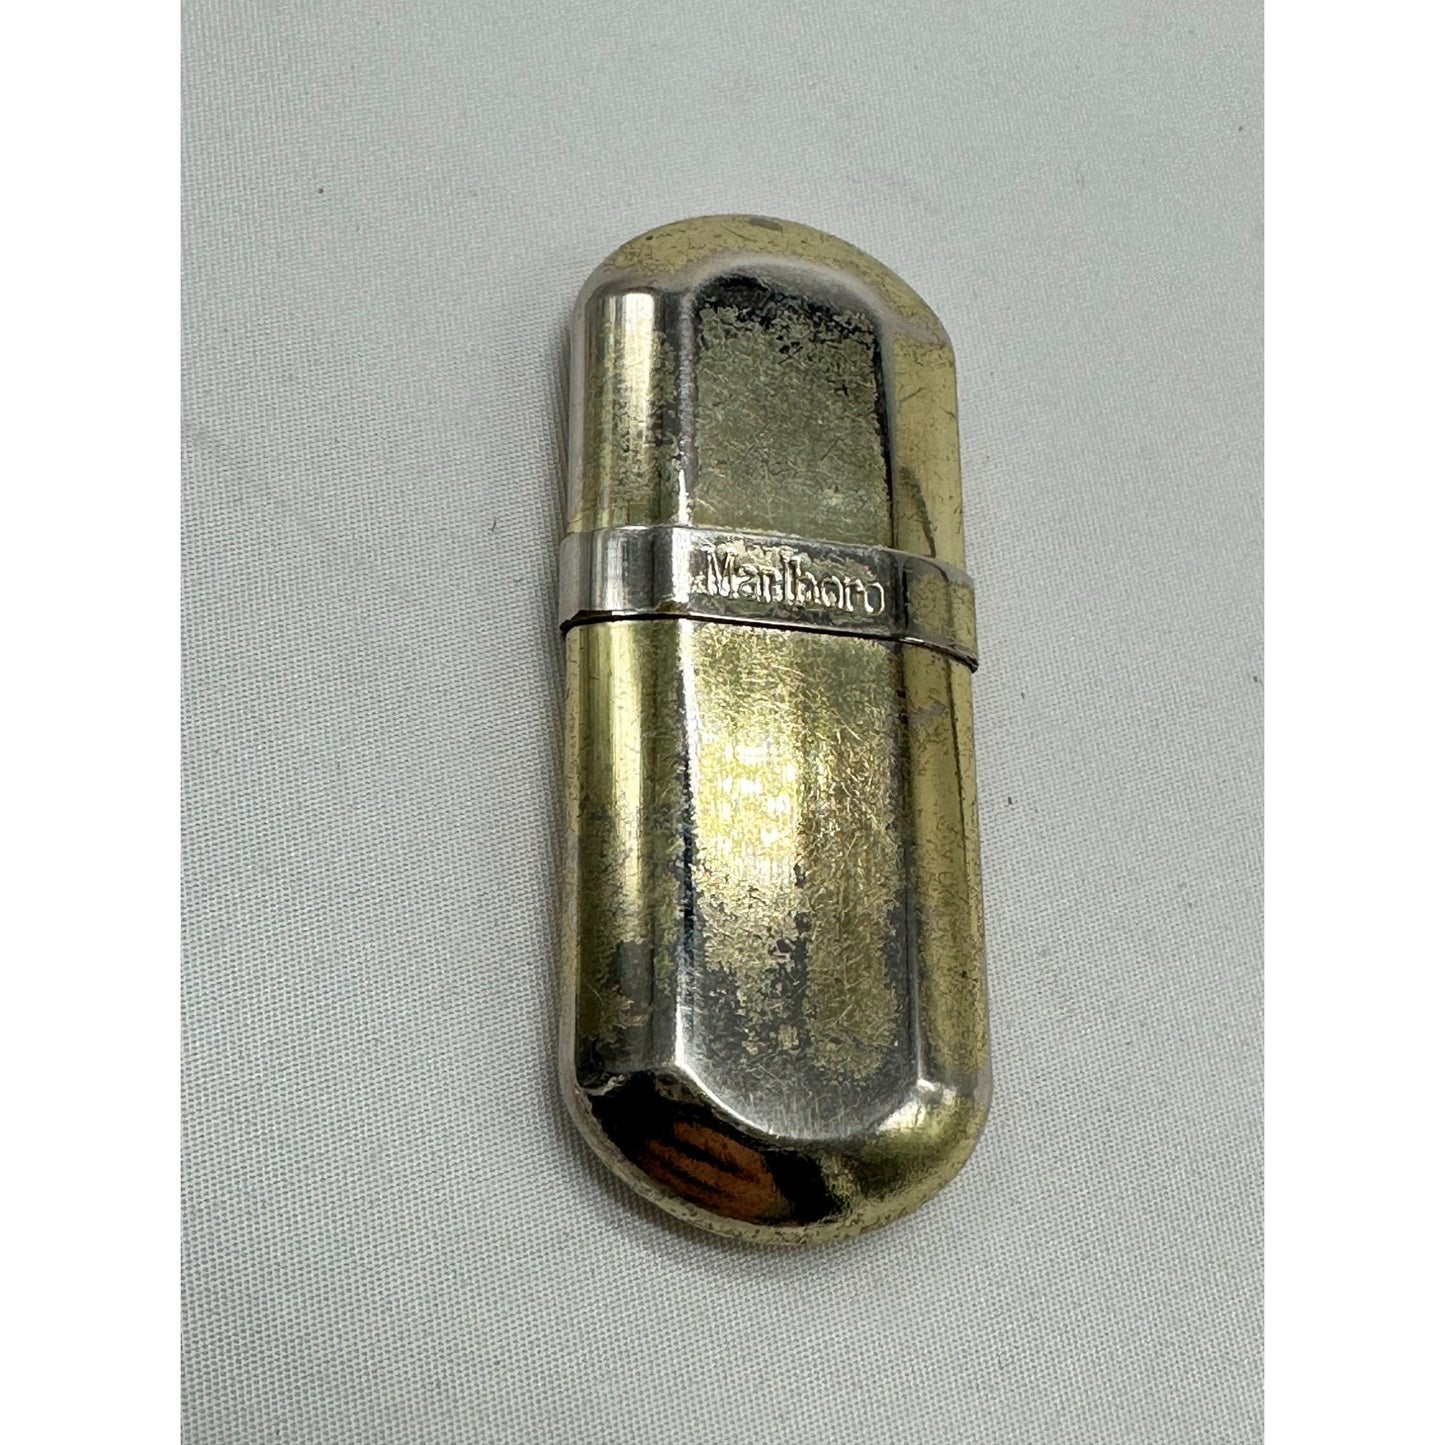 Antiques/ Vintage Marlboro Brass Cigarette Lighter Collectible Untested